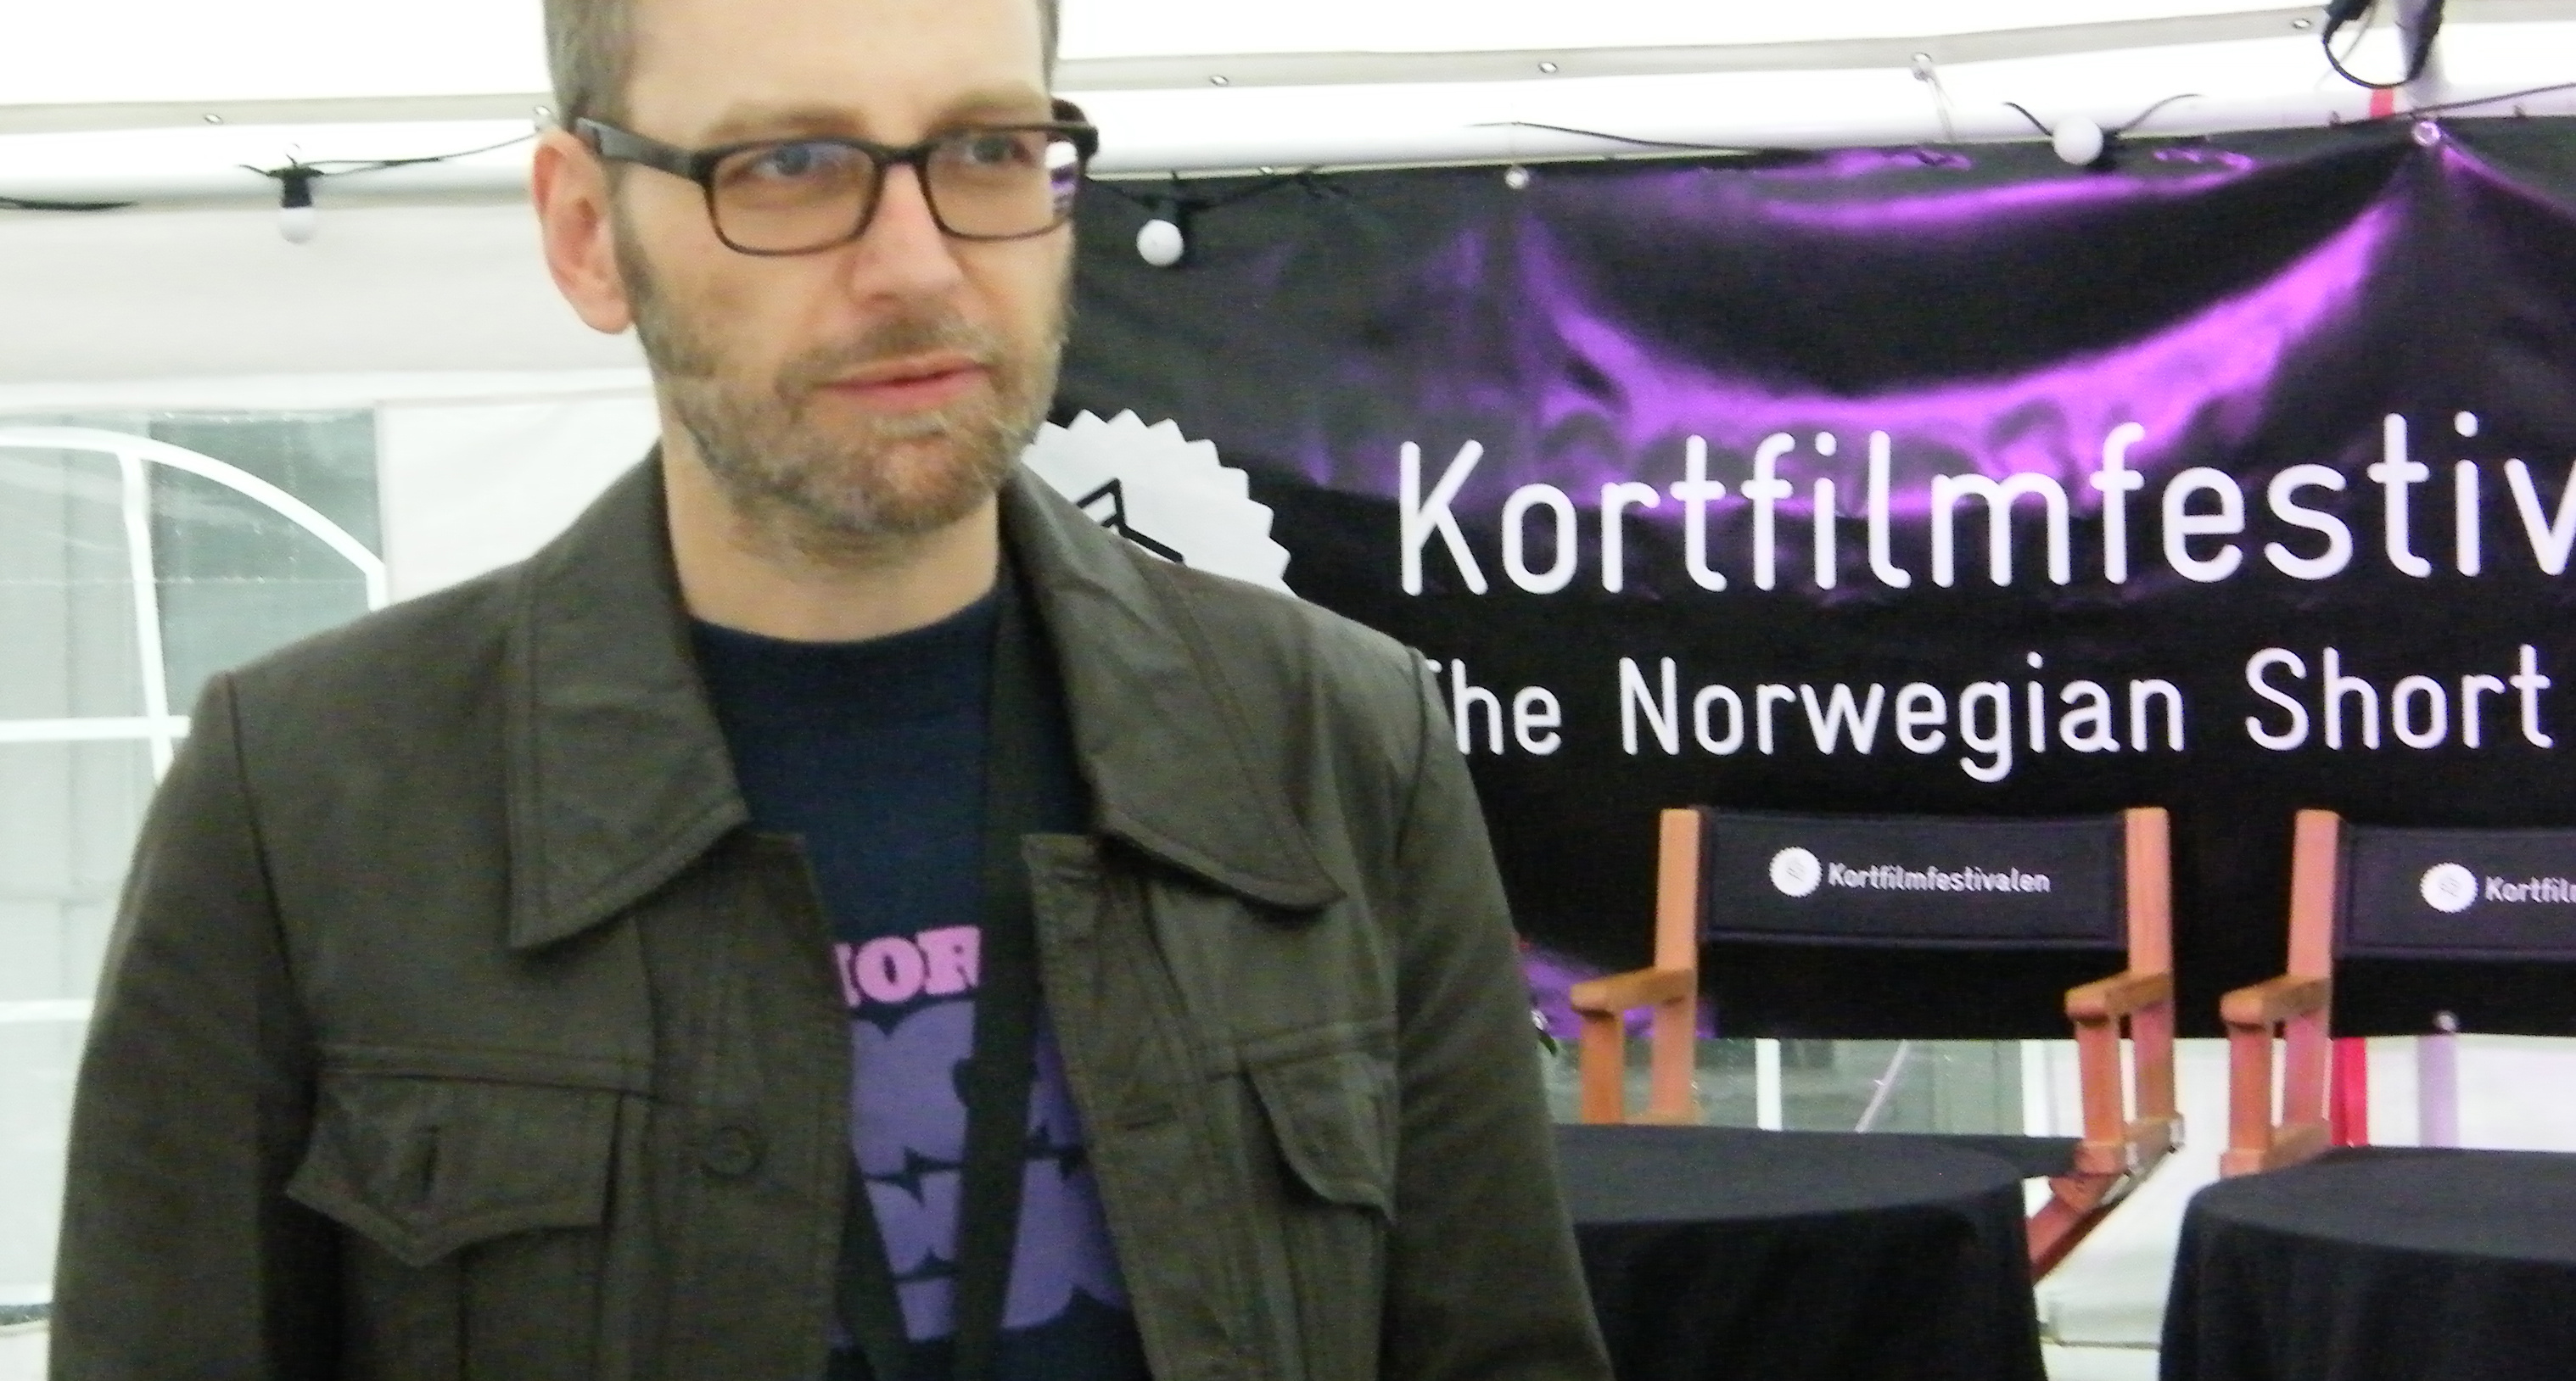 Walters in competition with Dot Delight at The Norwegian Short Film Festival, June 2015.